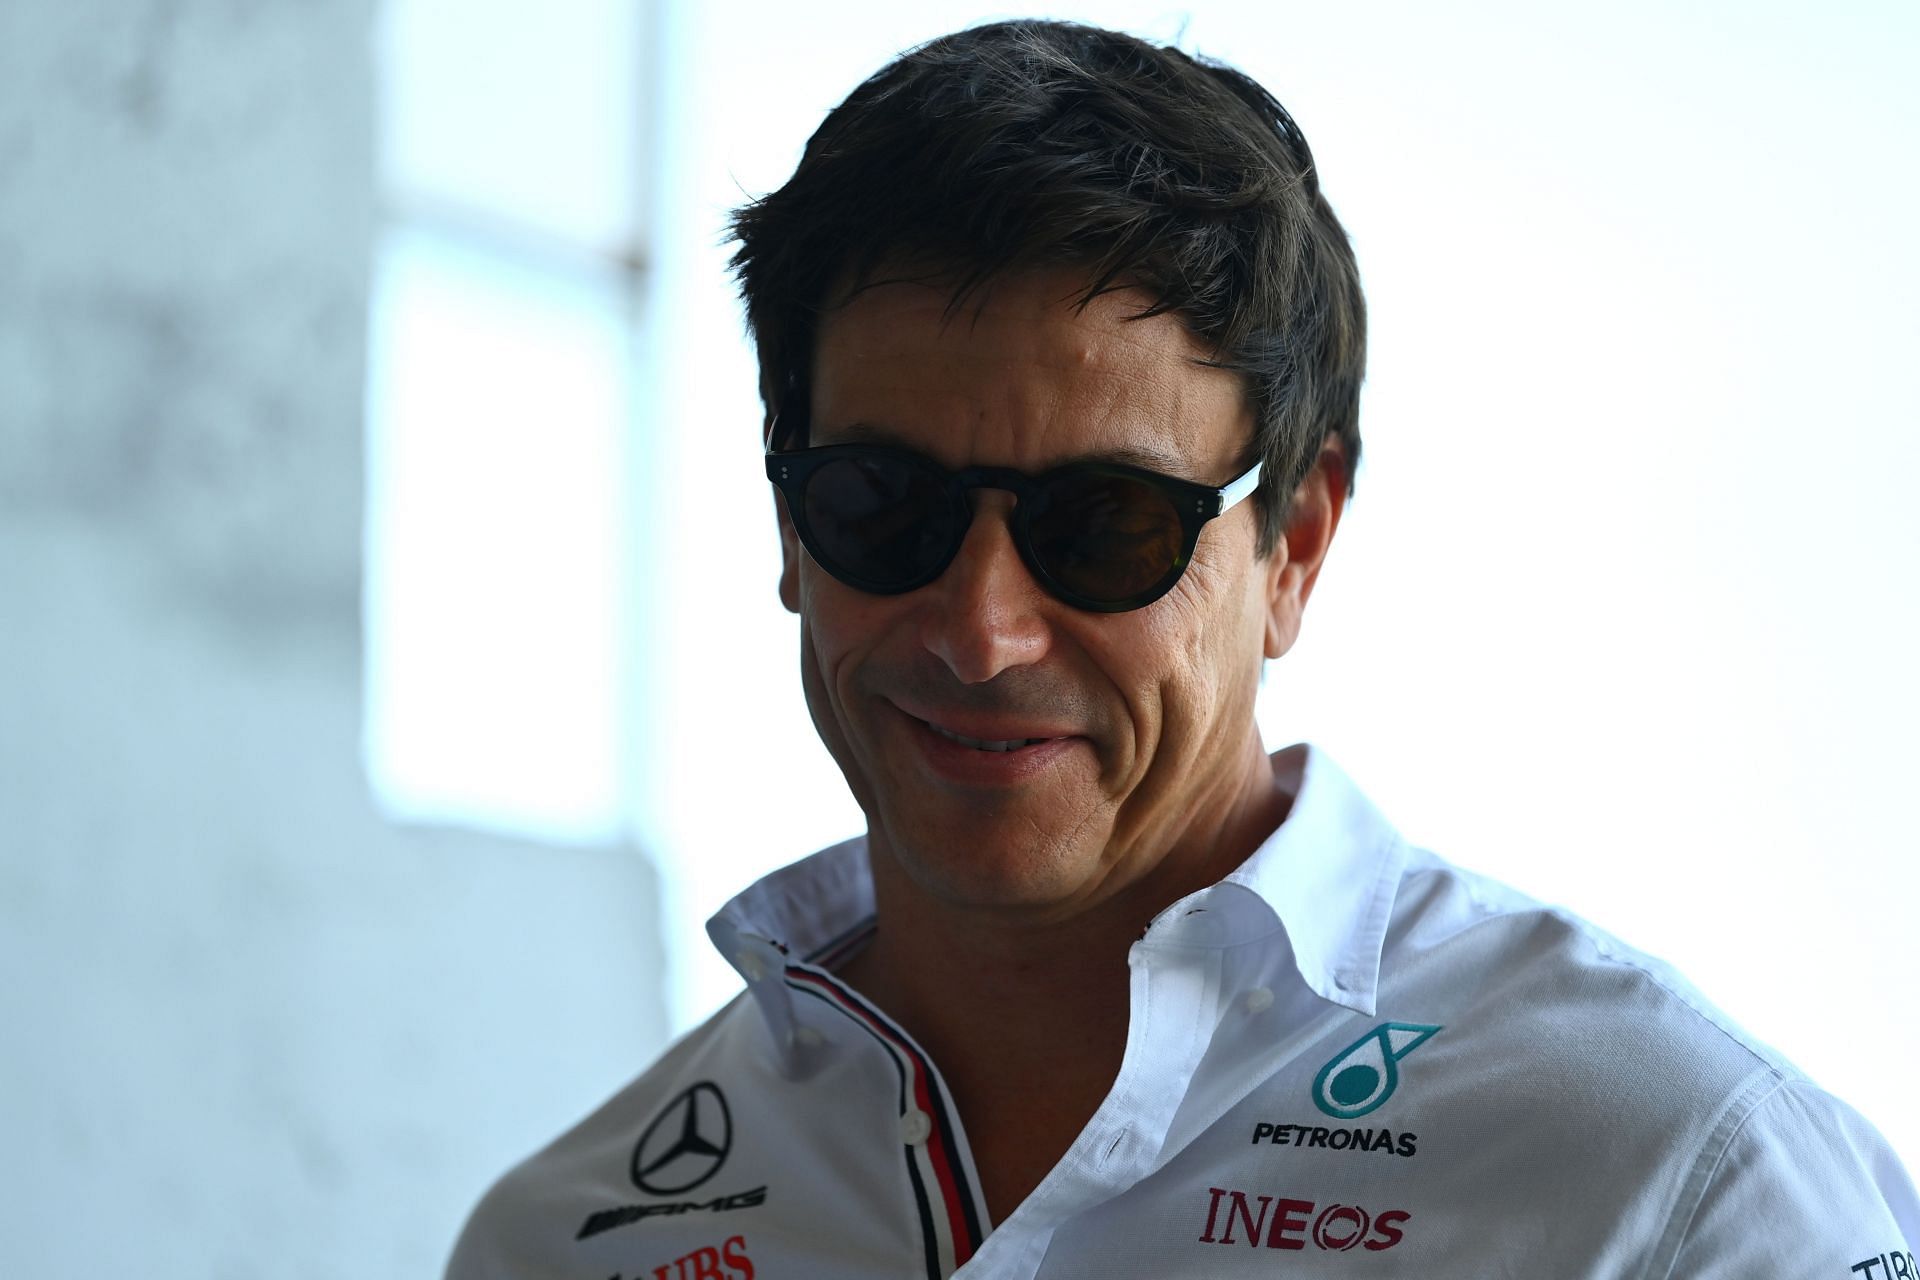 Mercedes GP Executive Director Toto Wolff walks in the Paddock before practice ahead of the F1 Grand Prix of Hungary at Hungaroring on July 29, 2022, in Budapest, Hungary (Photo by Dan Mullan/Getty Images)